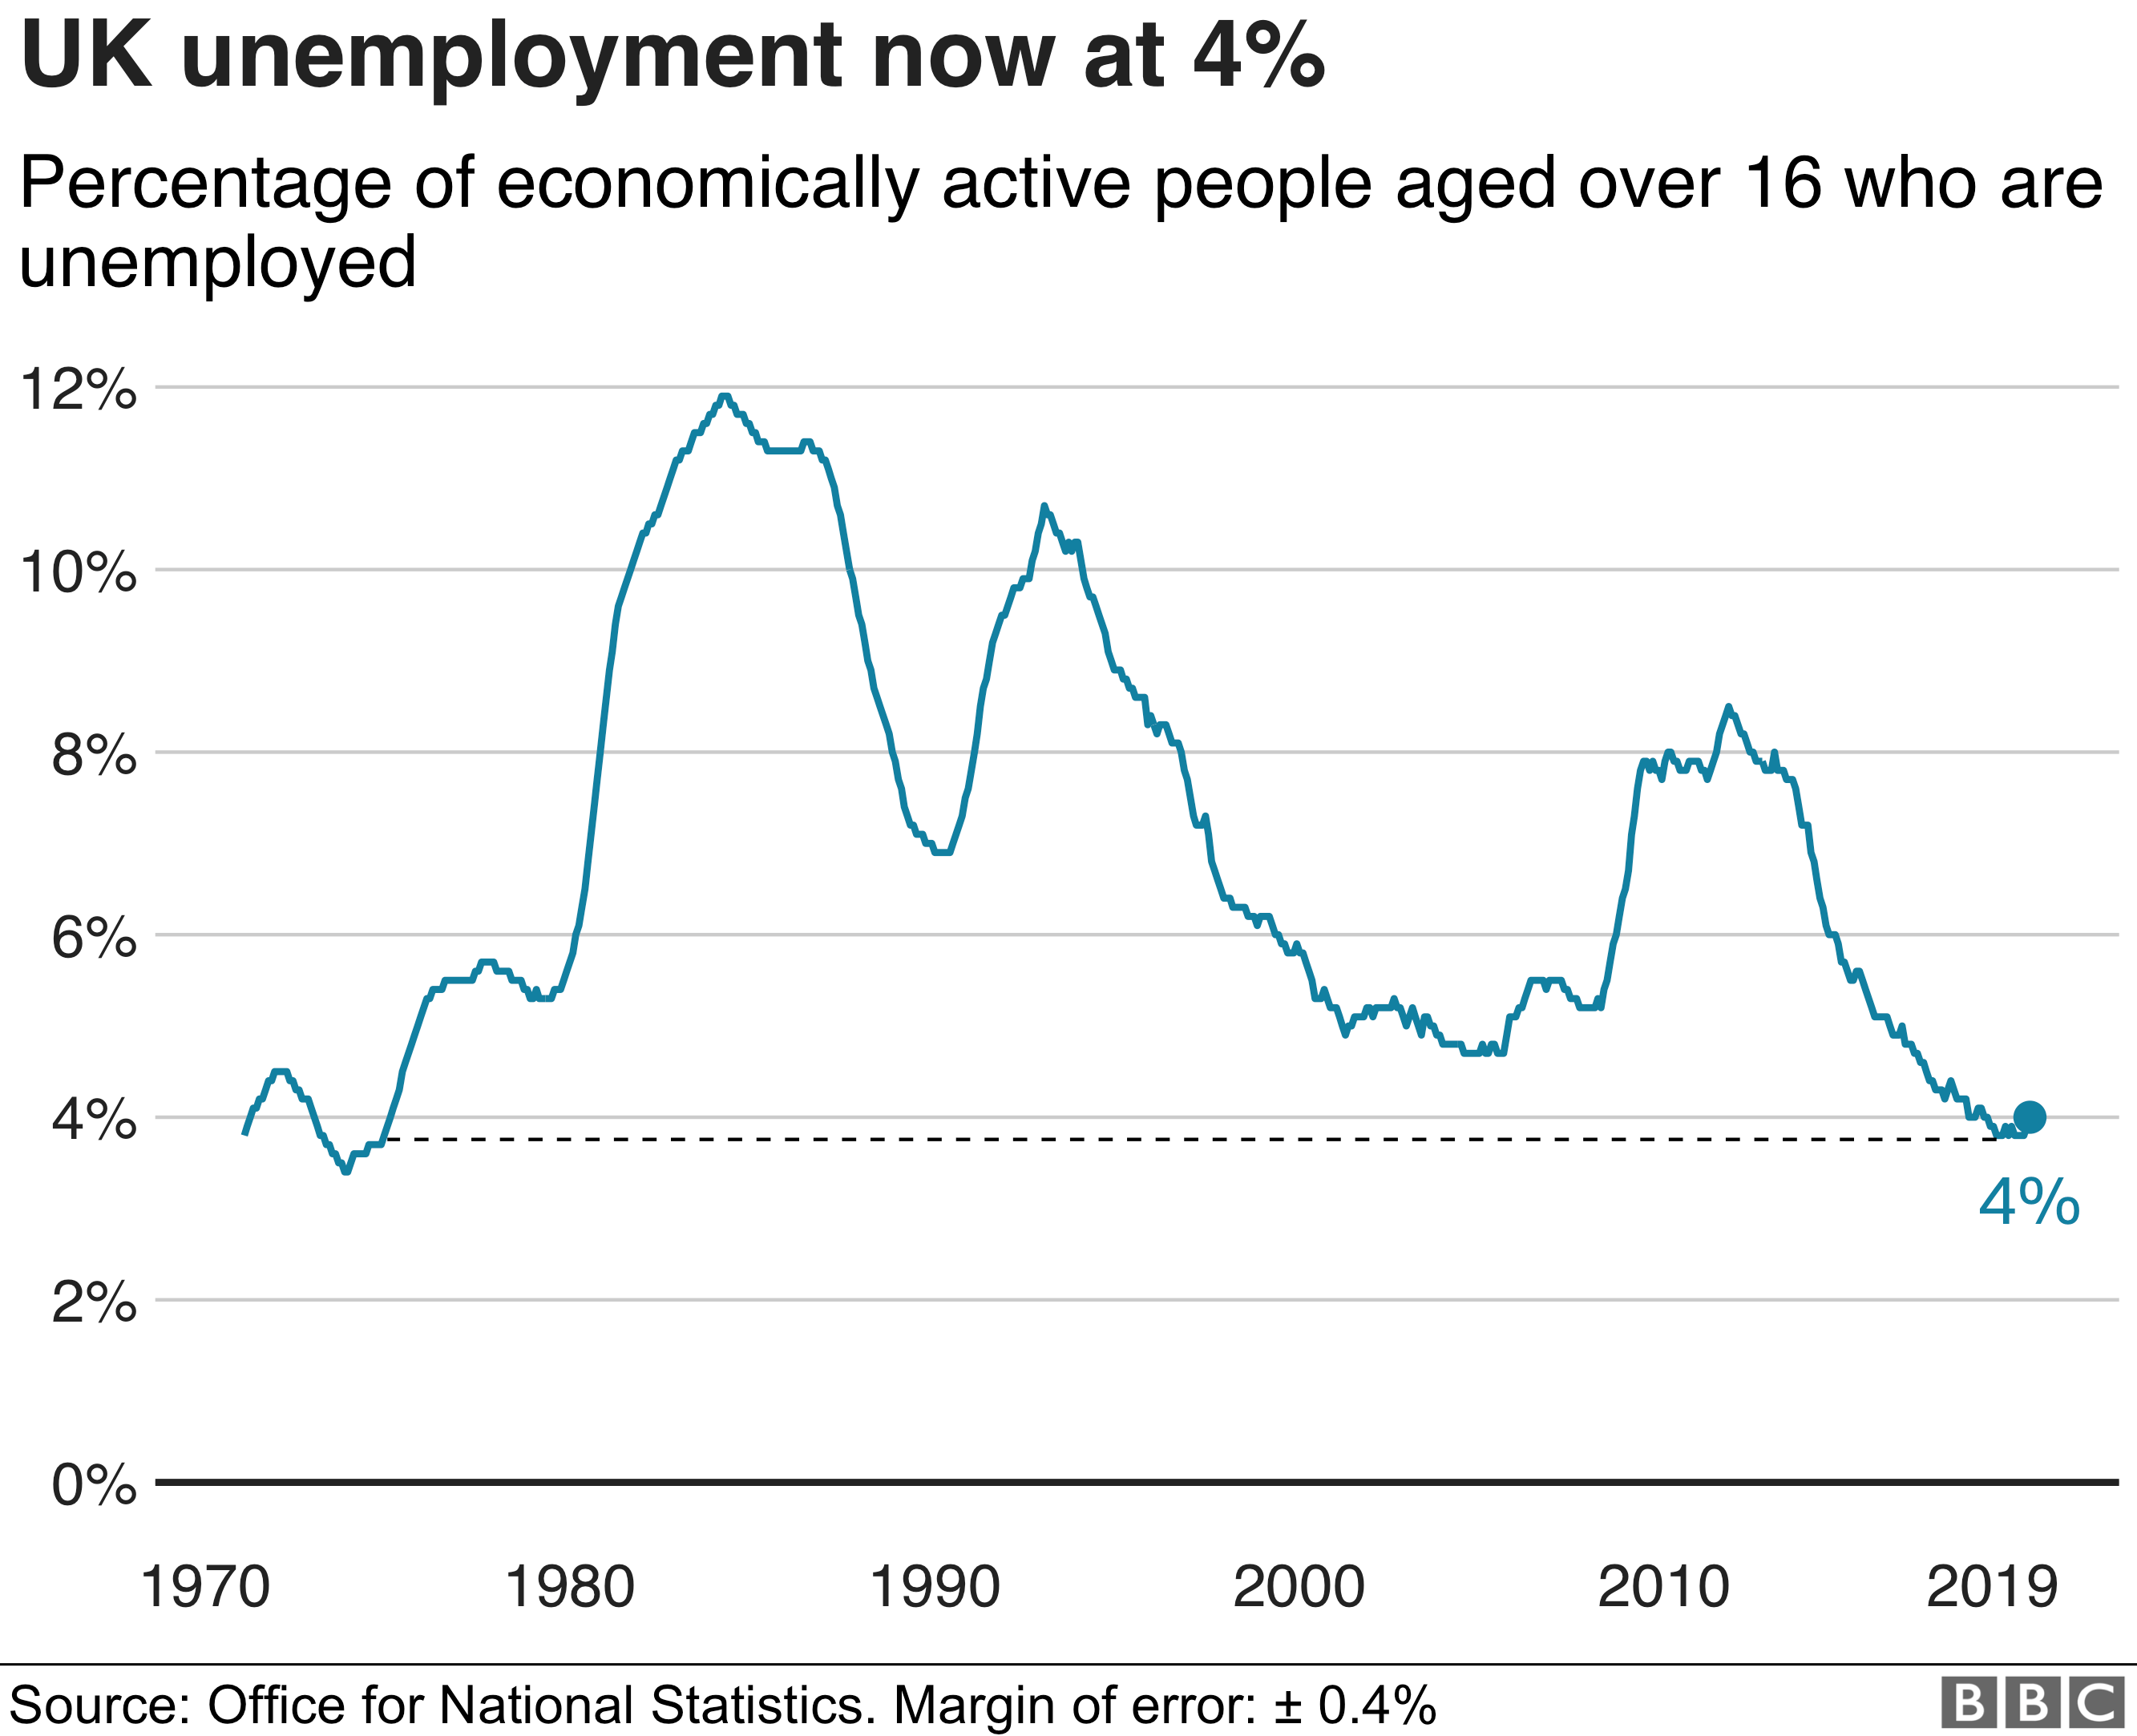 UK employment rate at record high before lockdown